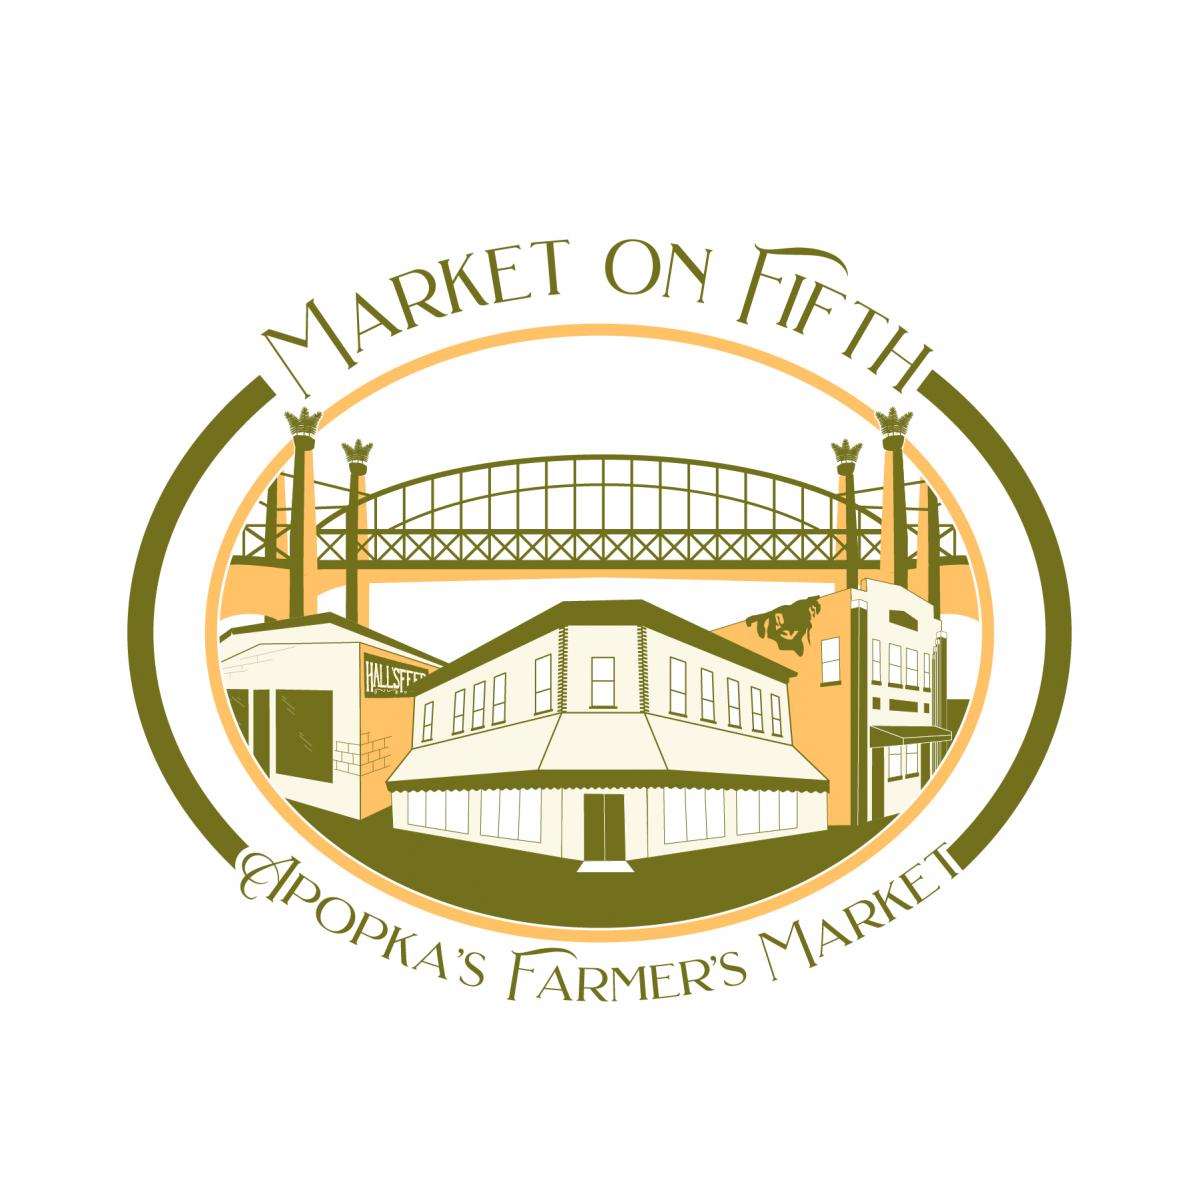 Market on Fifth cover image